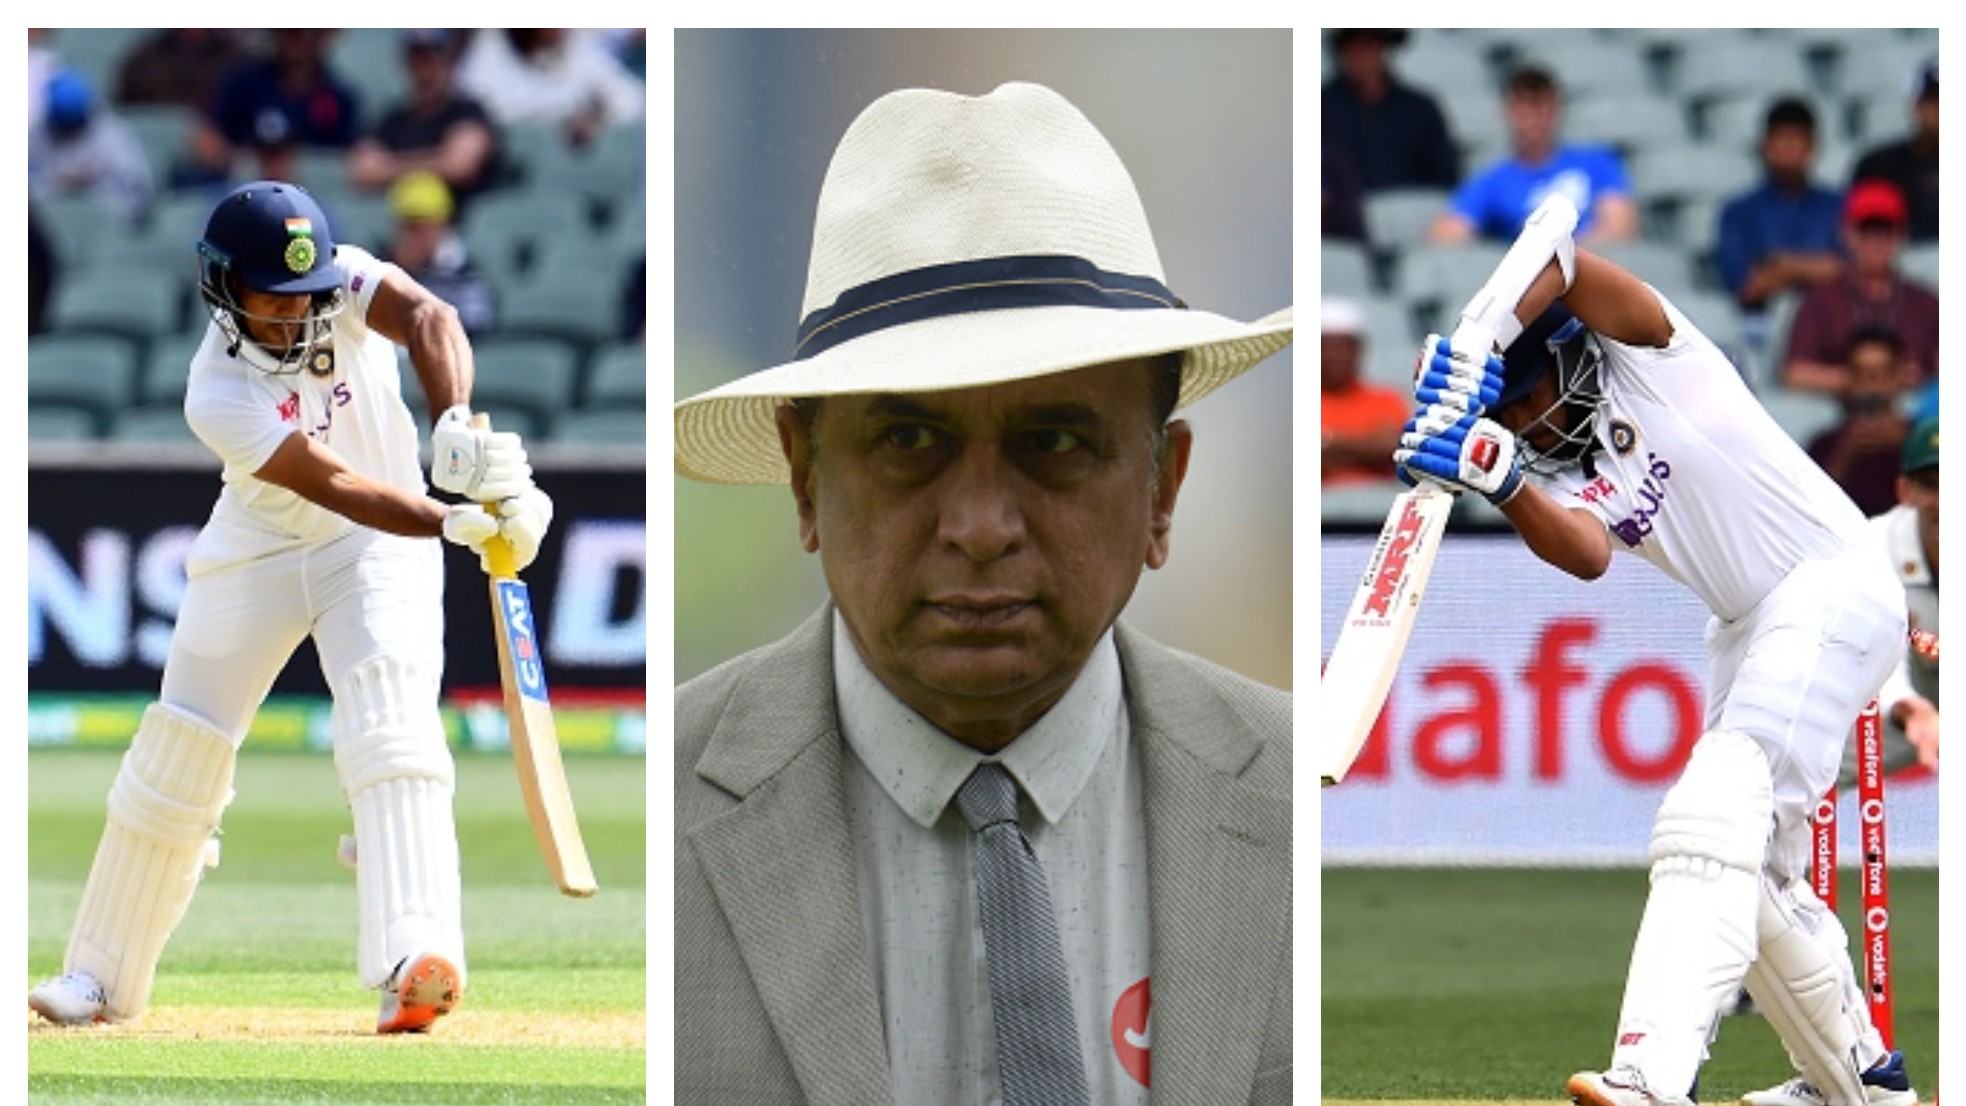 AUS v IND 2020-21: Sunil Gavaskar livid with Indian openers' mode of dismissals on Day 1 in Adelaide